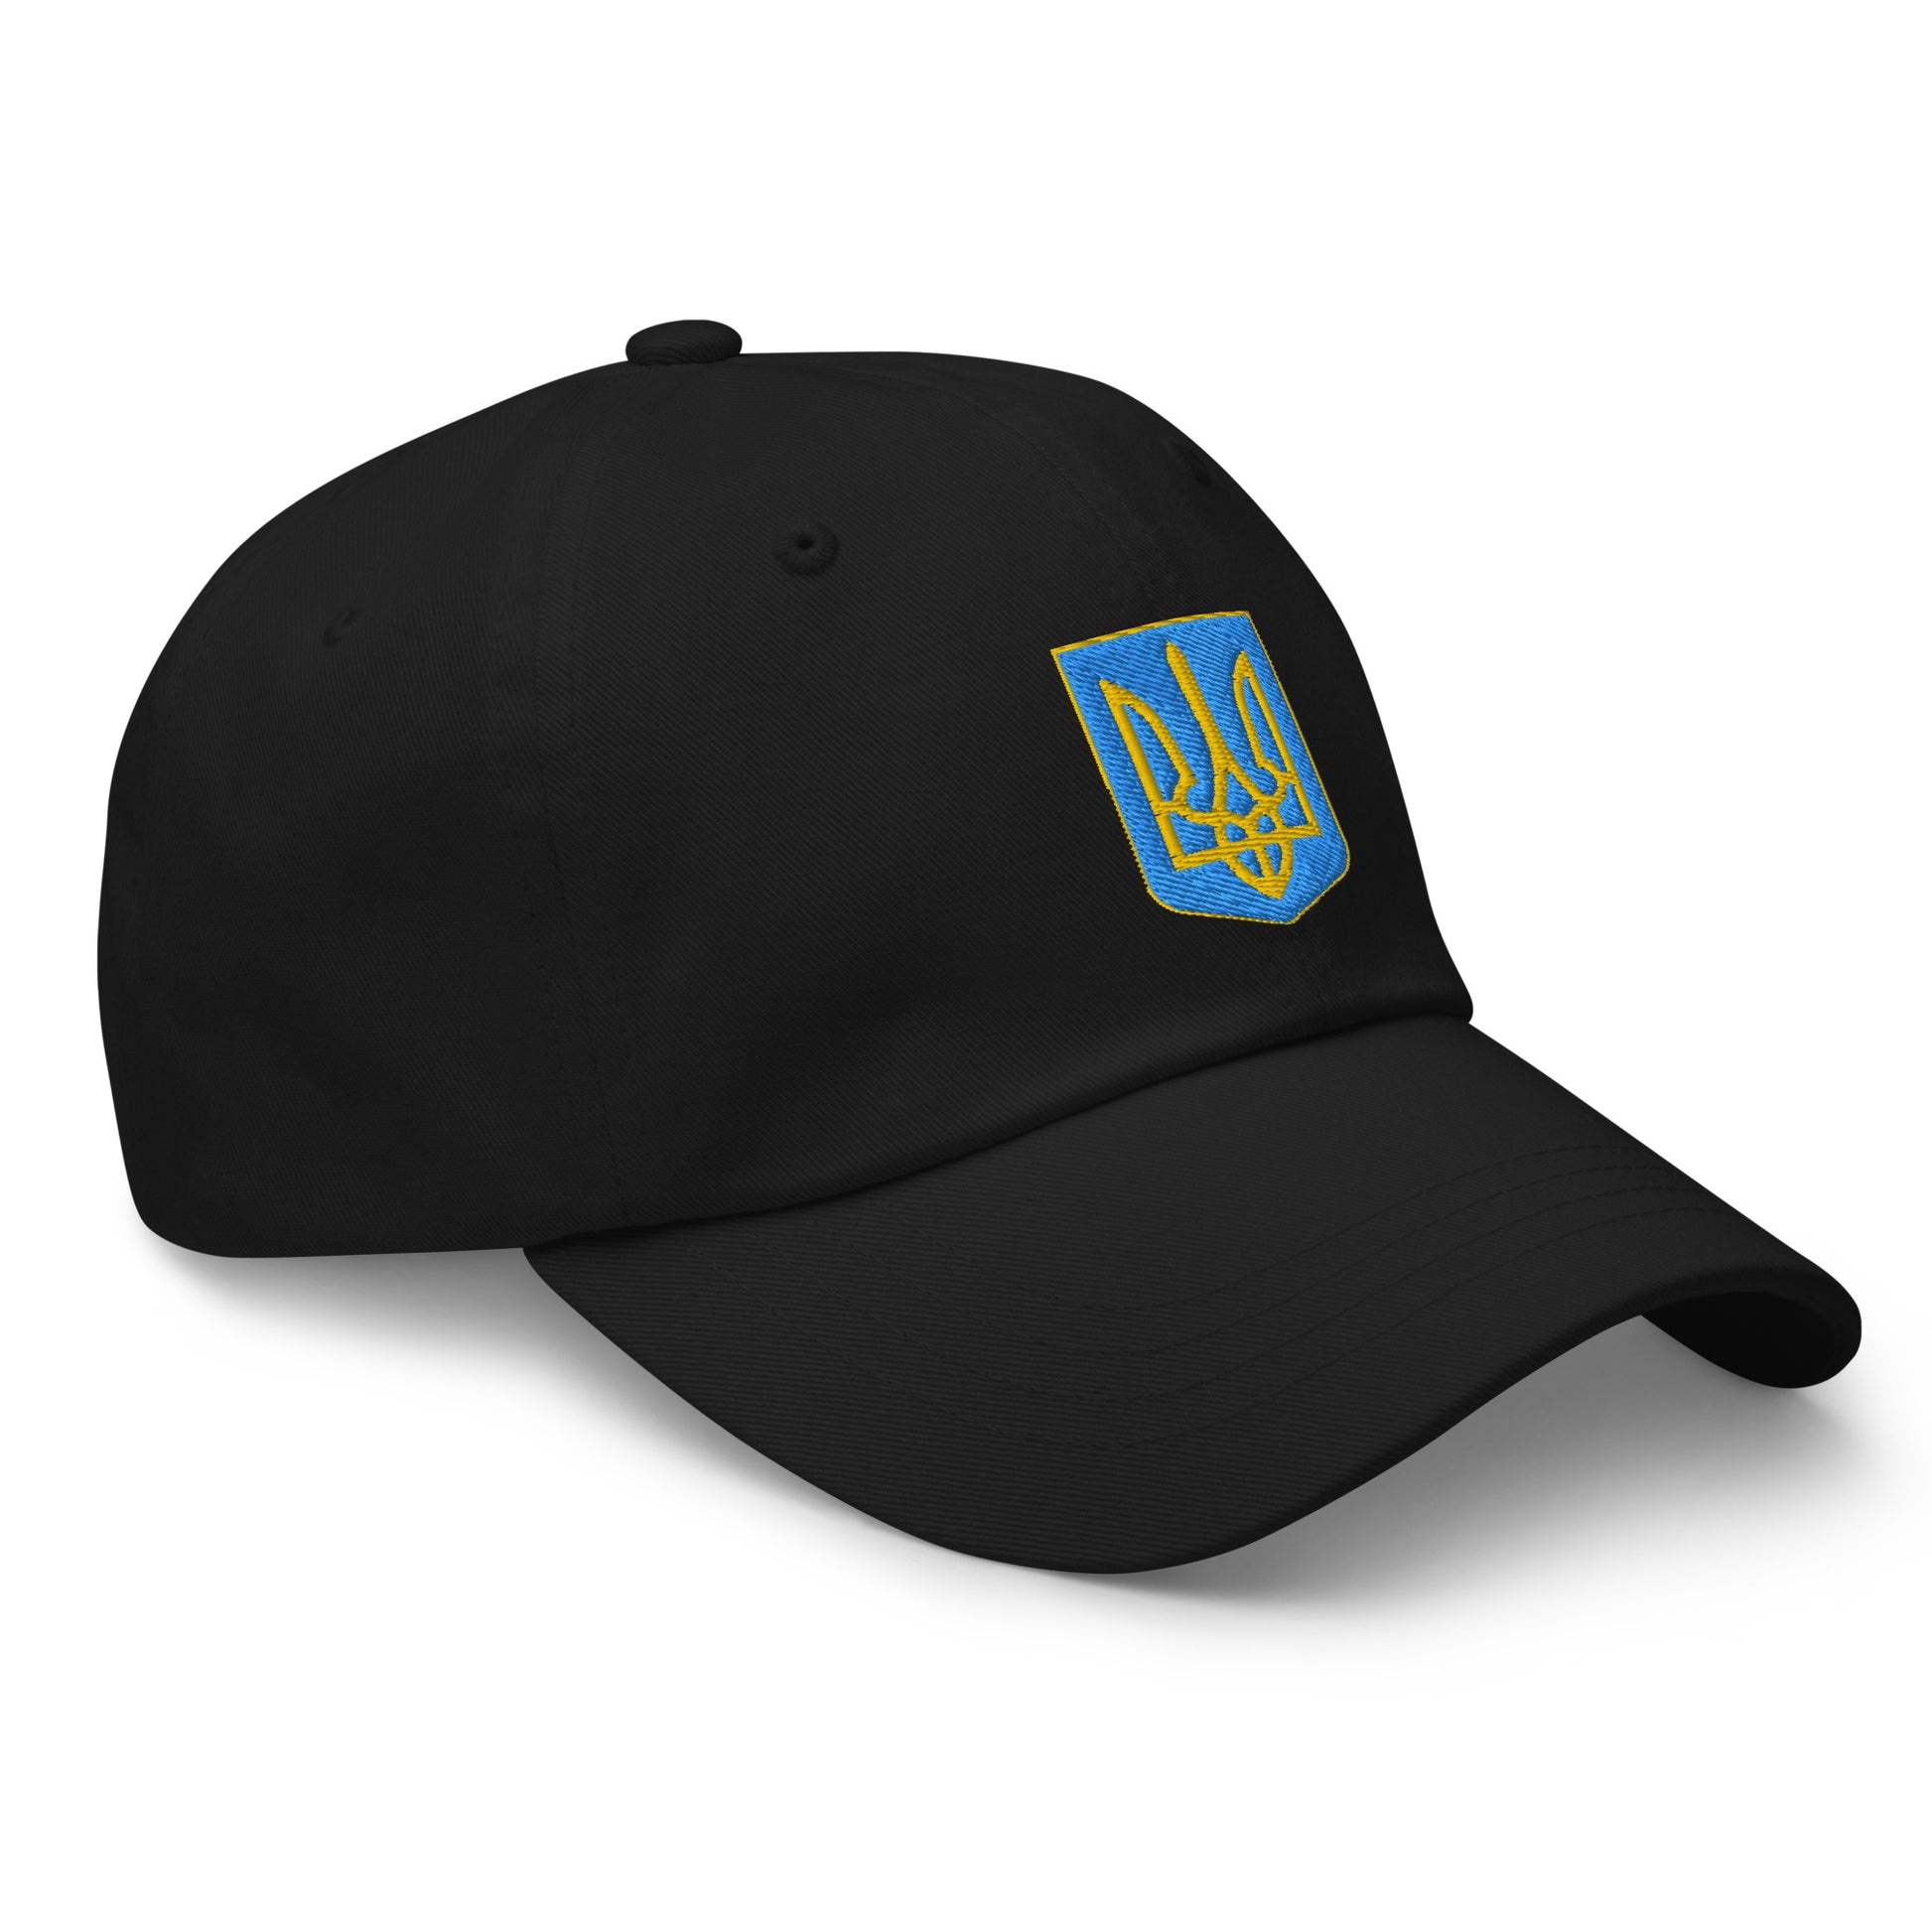 Black Dad Hat with intricate embroidered Ukraine flag